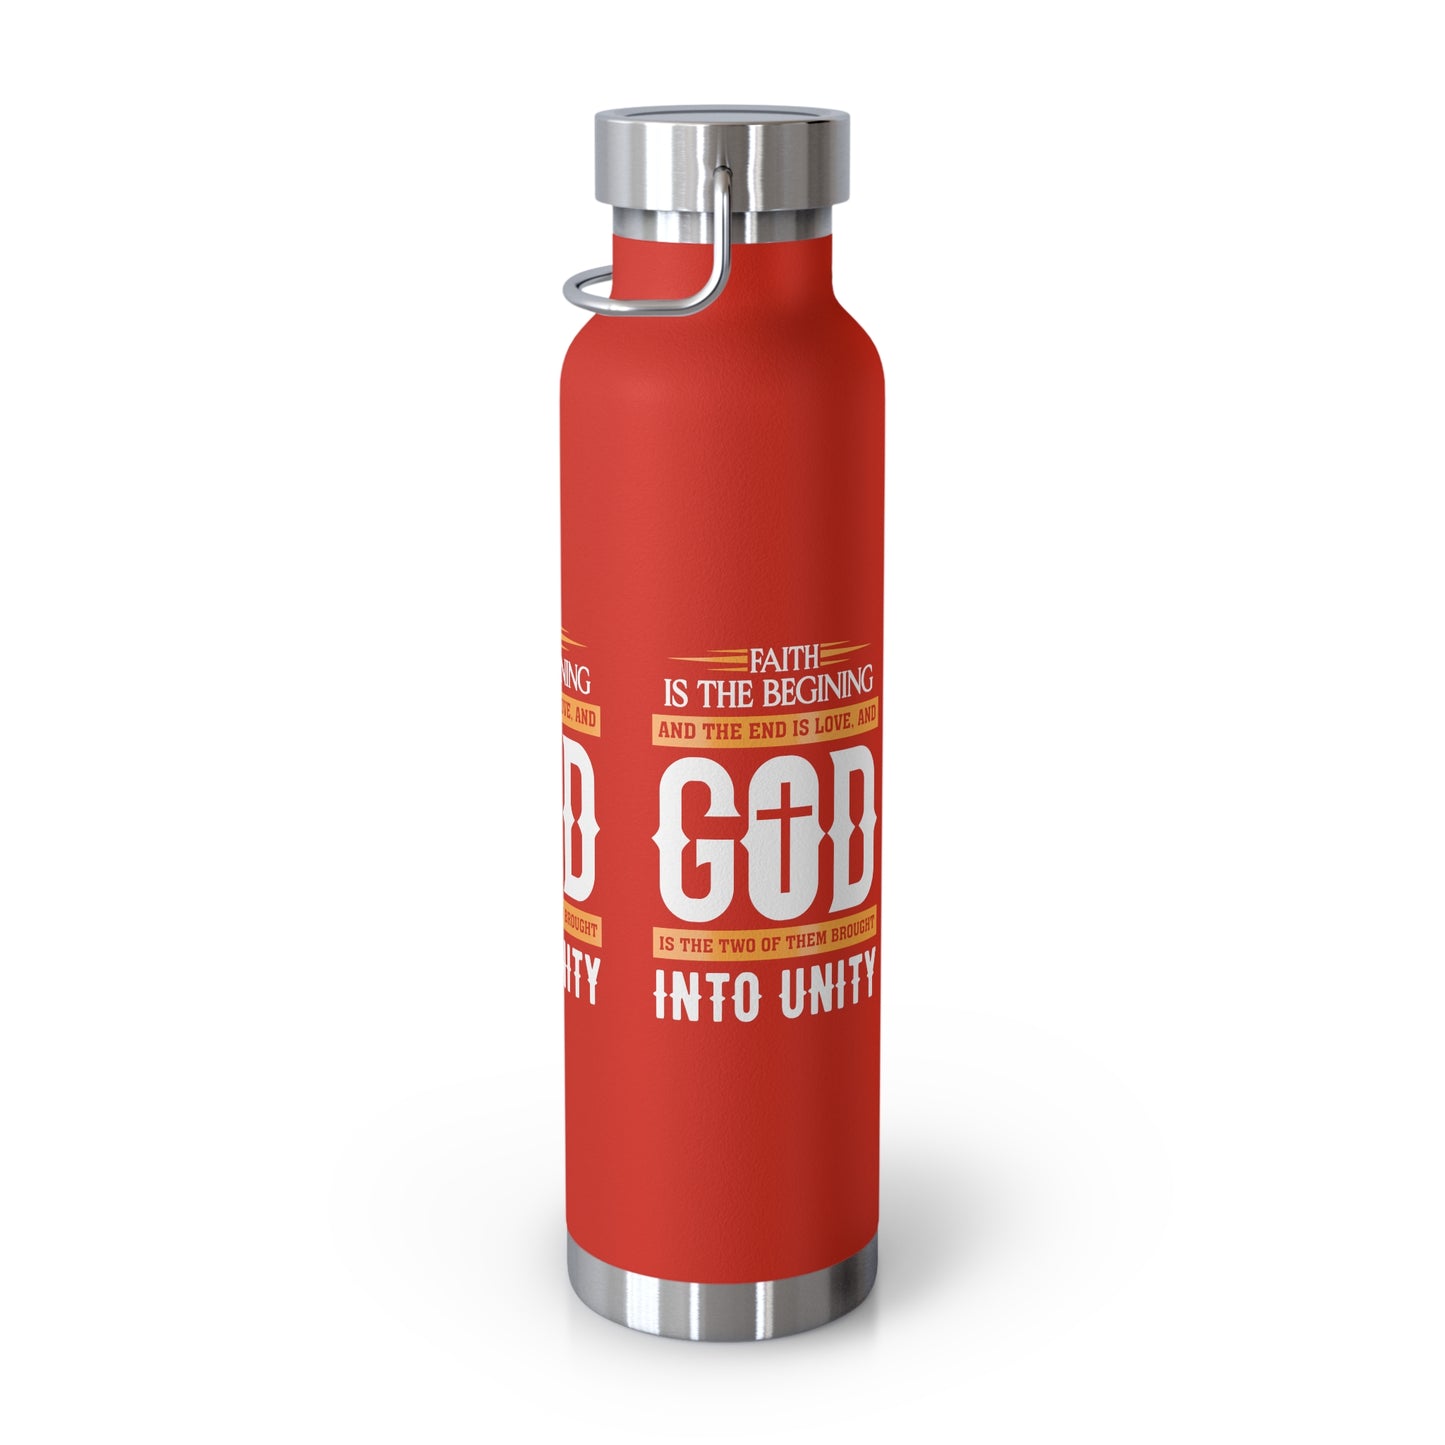 Faith and Love Copper Vacuum Insulated Bottle, 22oz